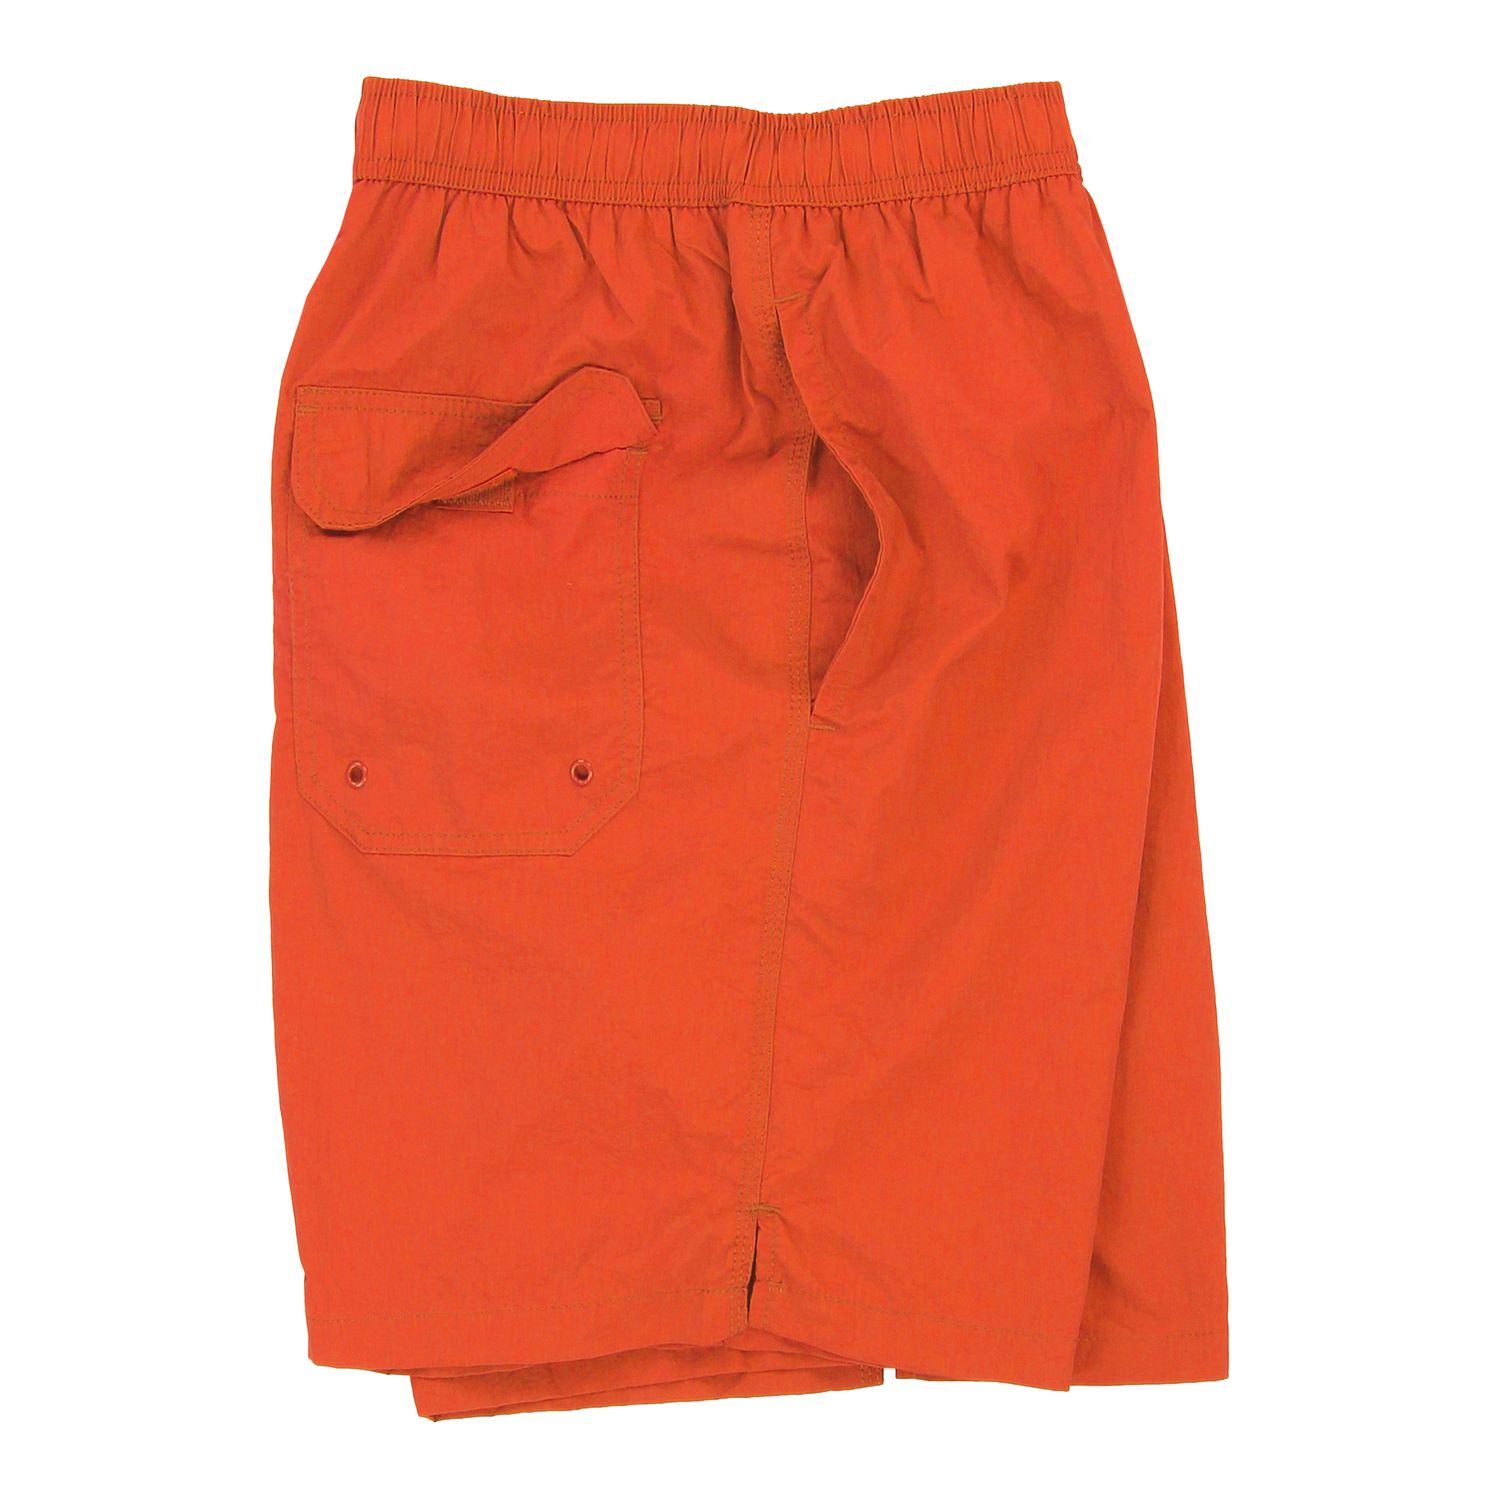 Swimshorts by North 56°4 orange in oversizes up to 8XL